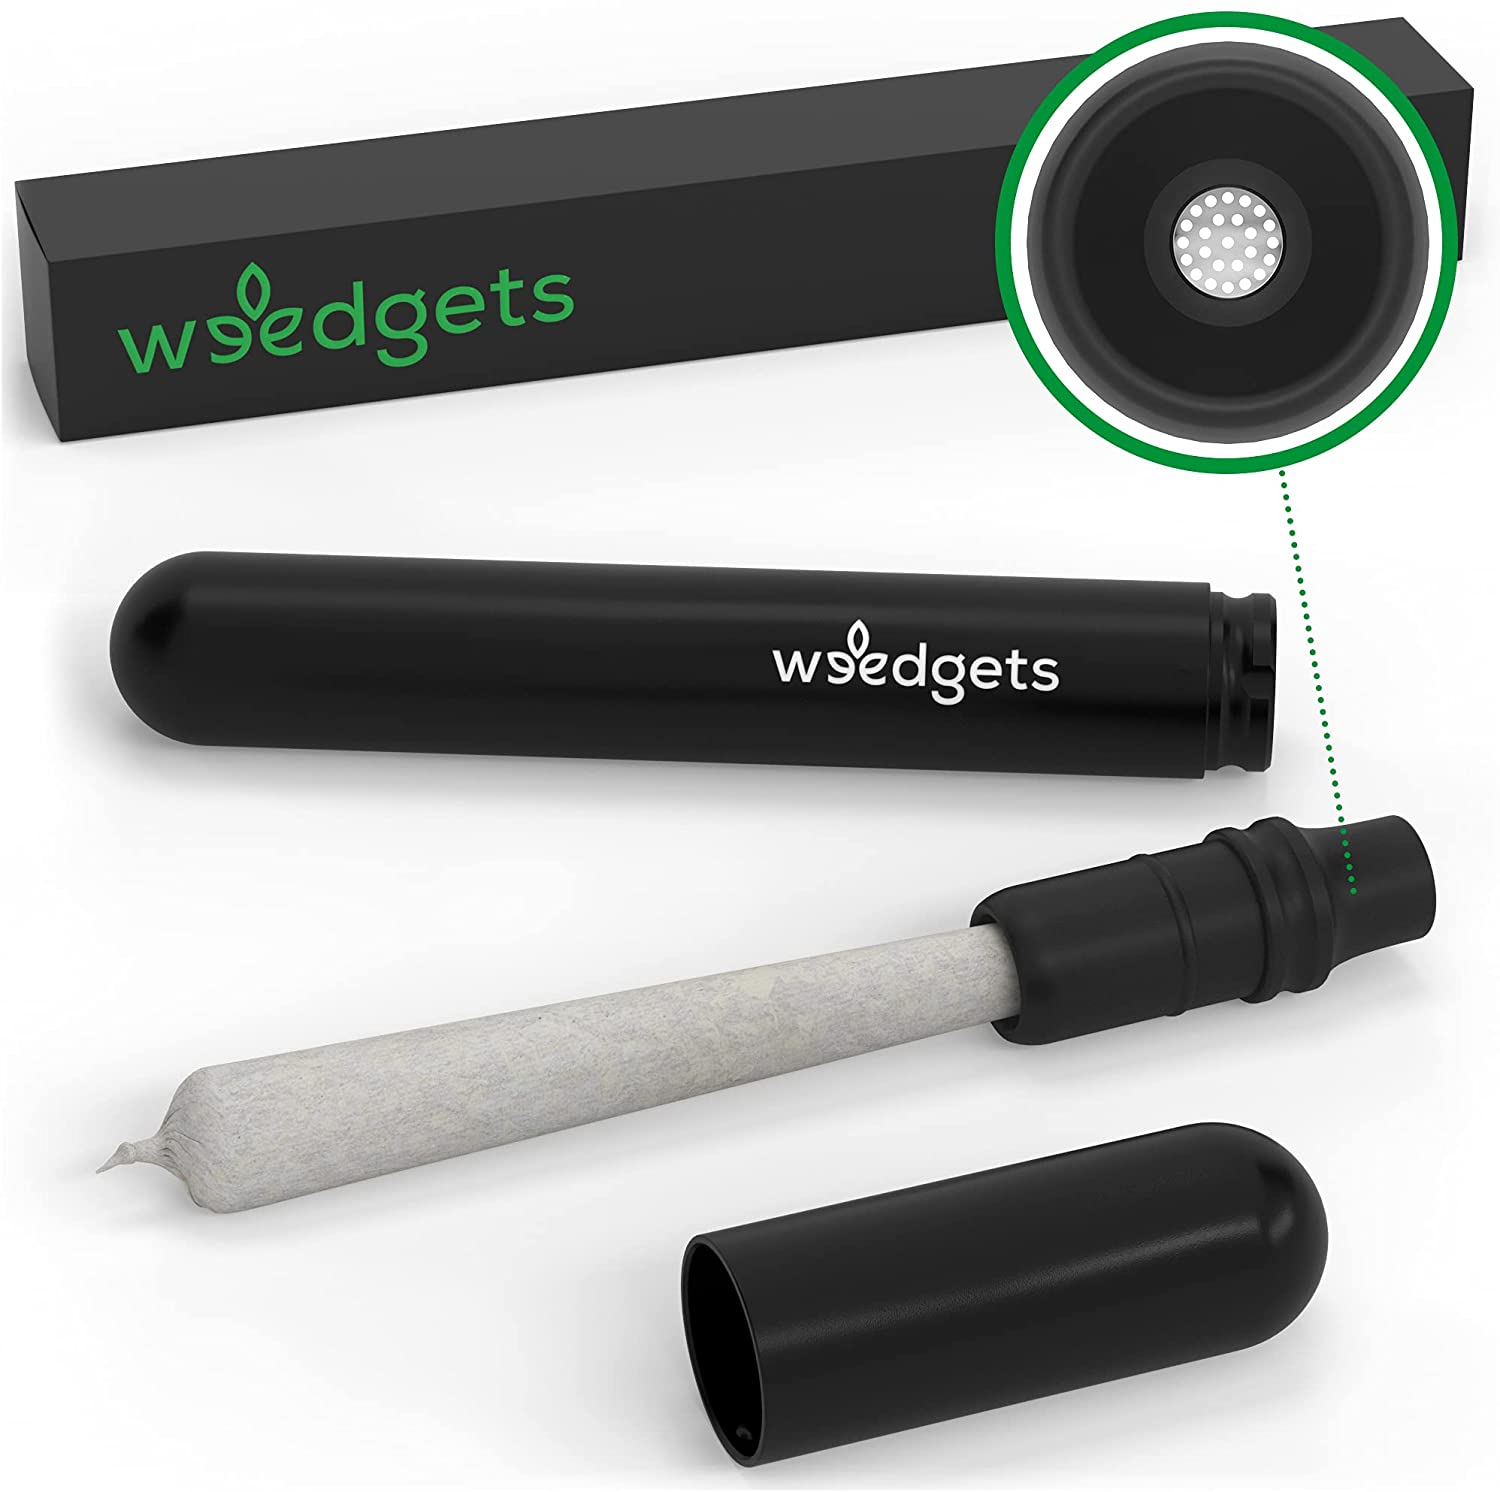 Coughless Filter Tips with aluminum carrying case for joints and pre-rolls, Weedgets - Boston